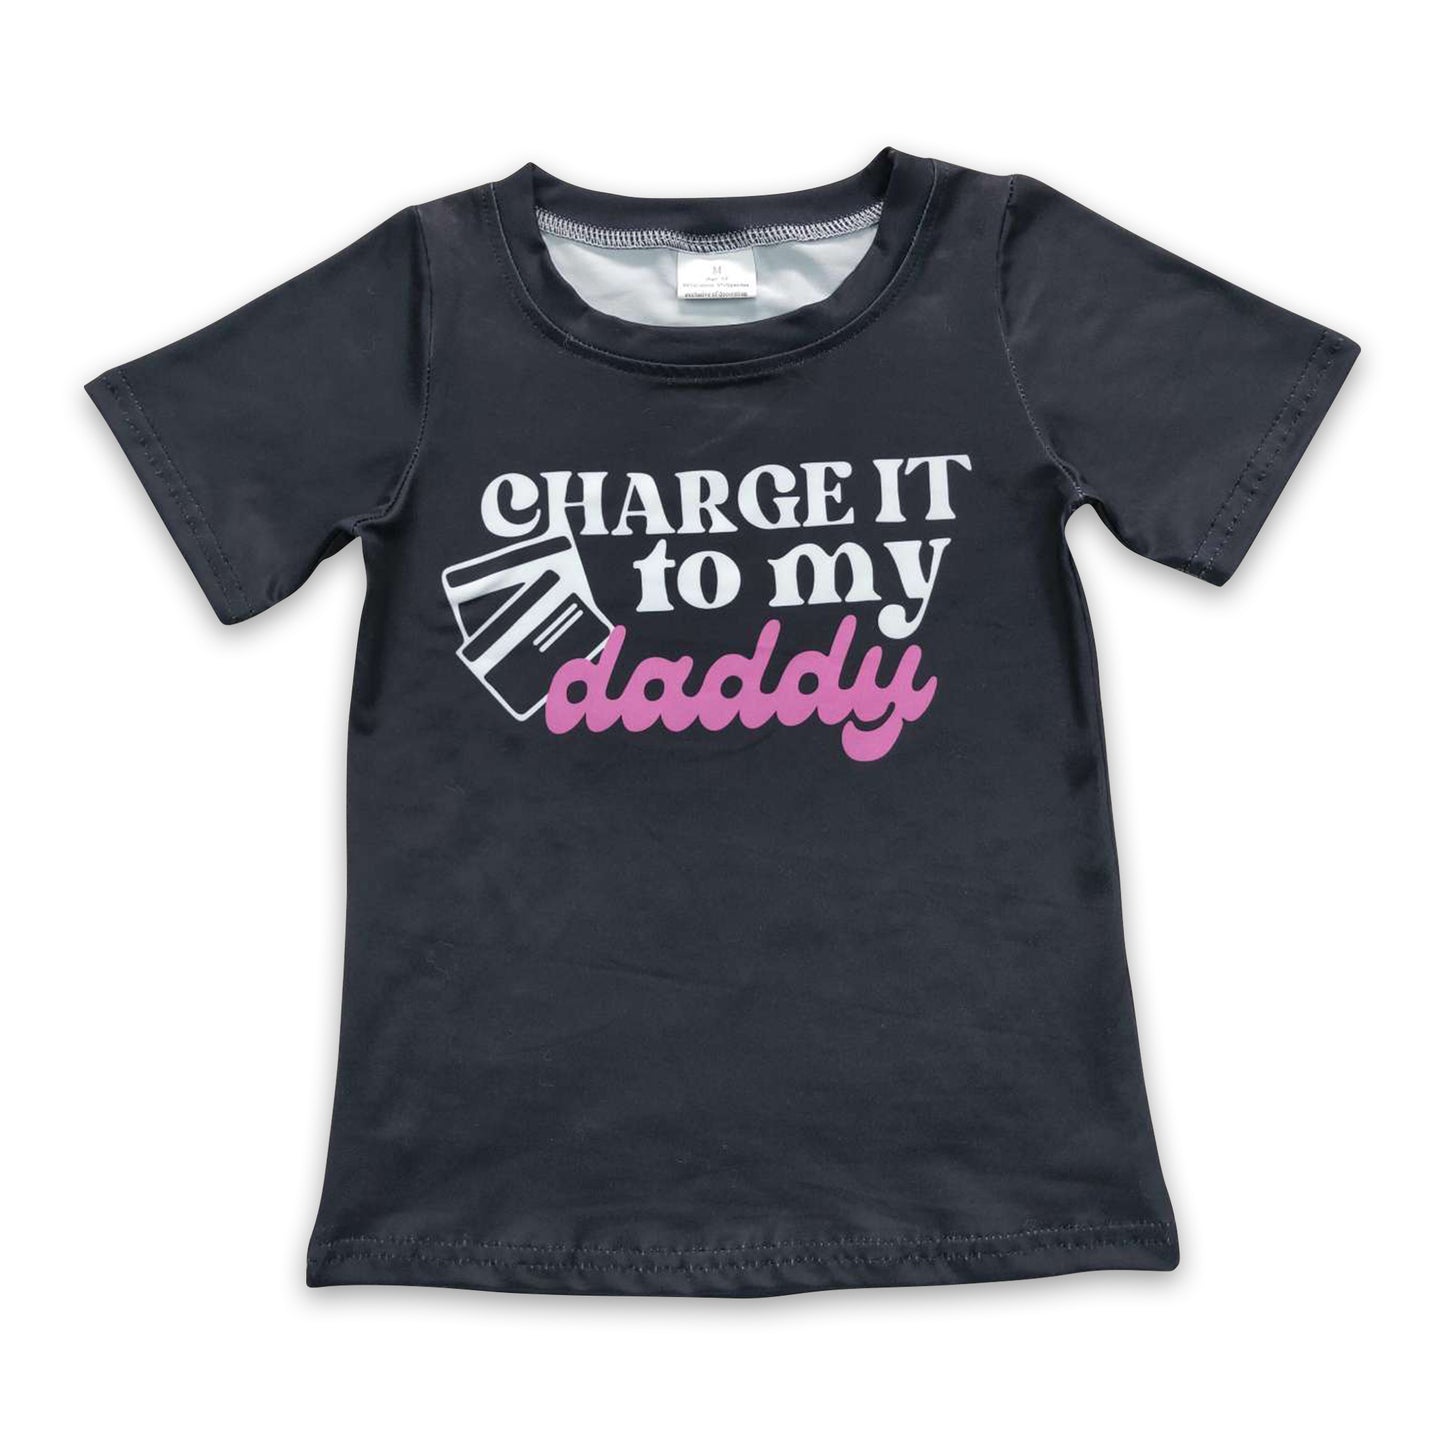 Charge it to my daddy black short sleeves girls shirt